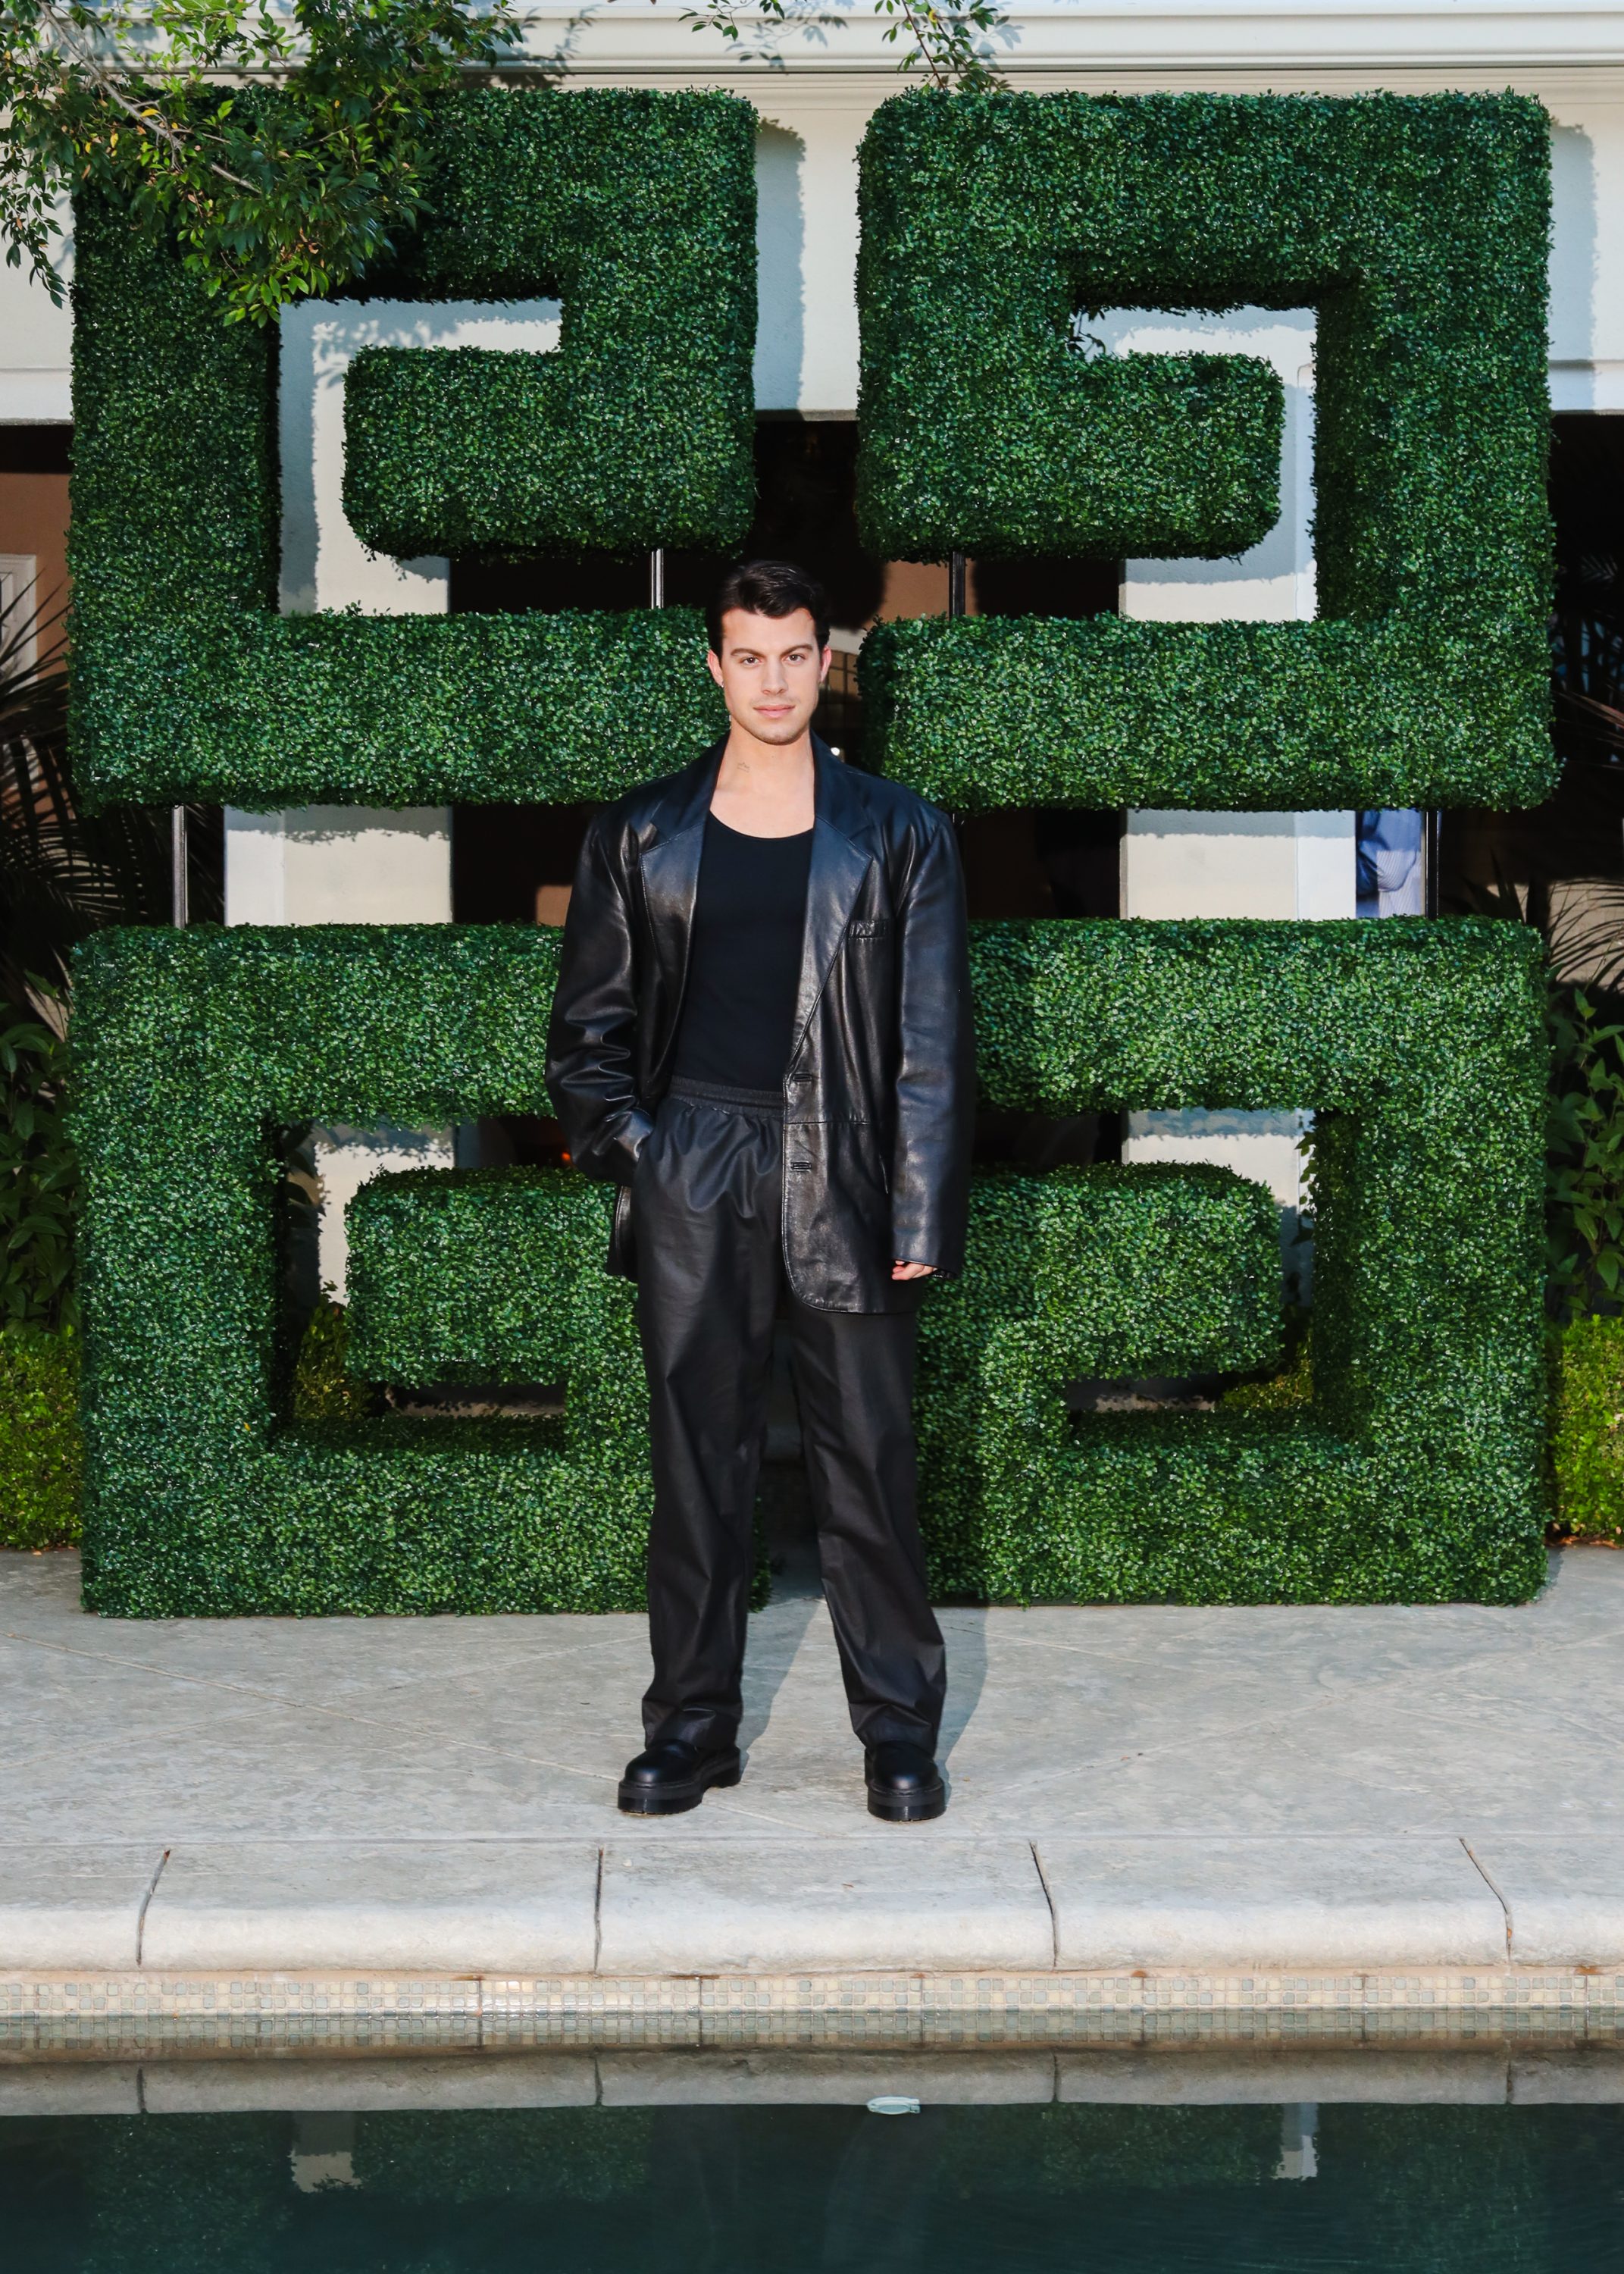 Last night, I attended the @givenchy store opening on #RodeoDrive